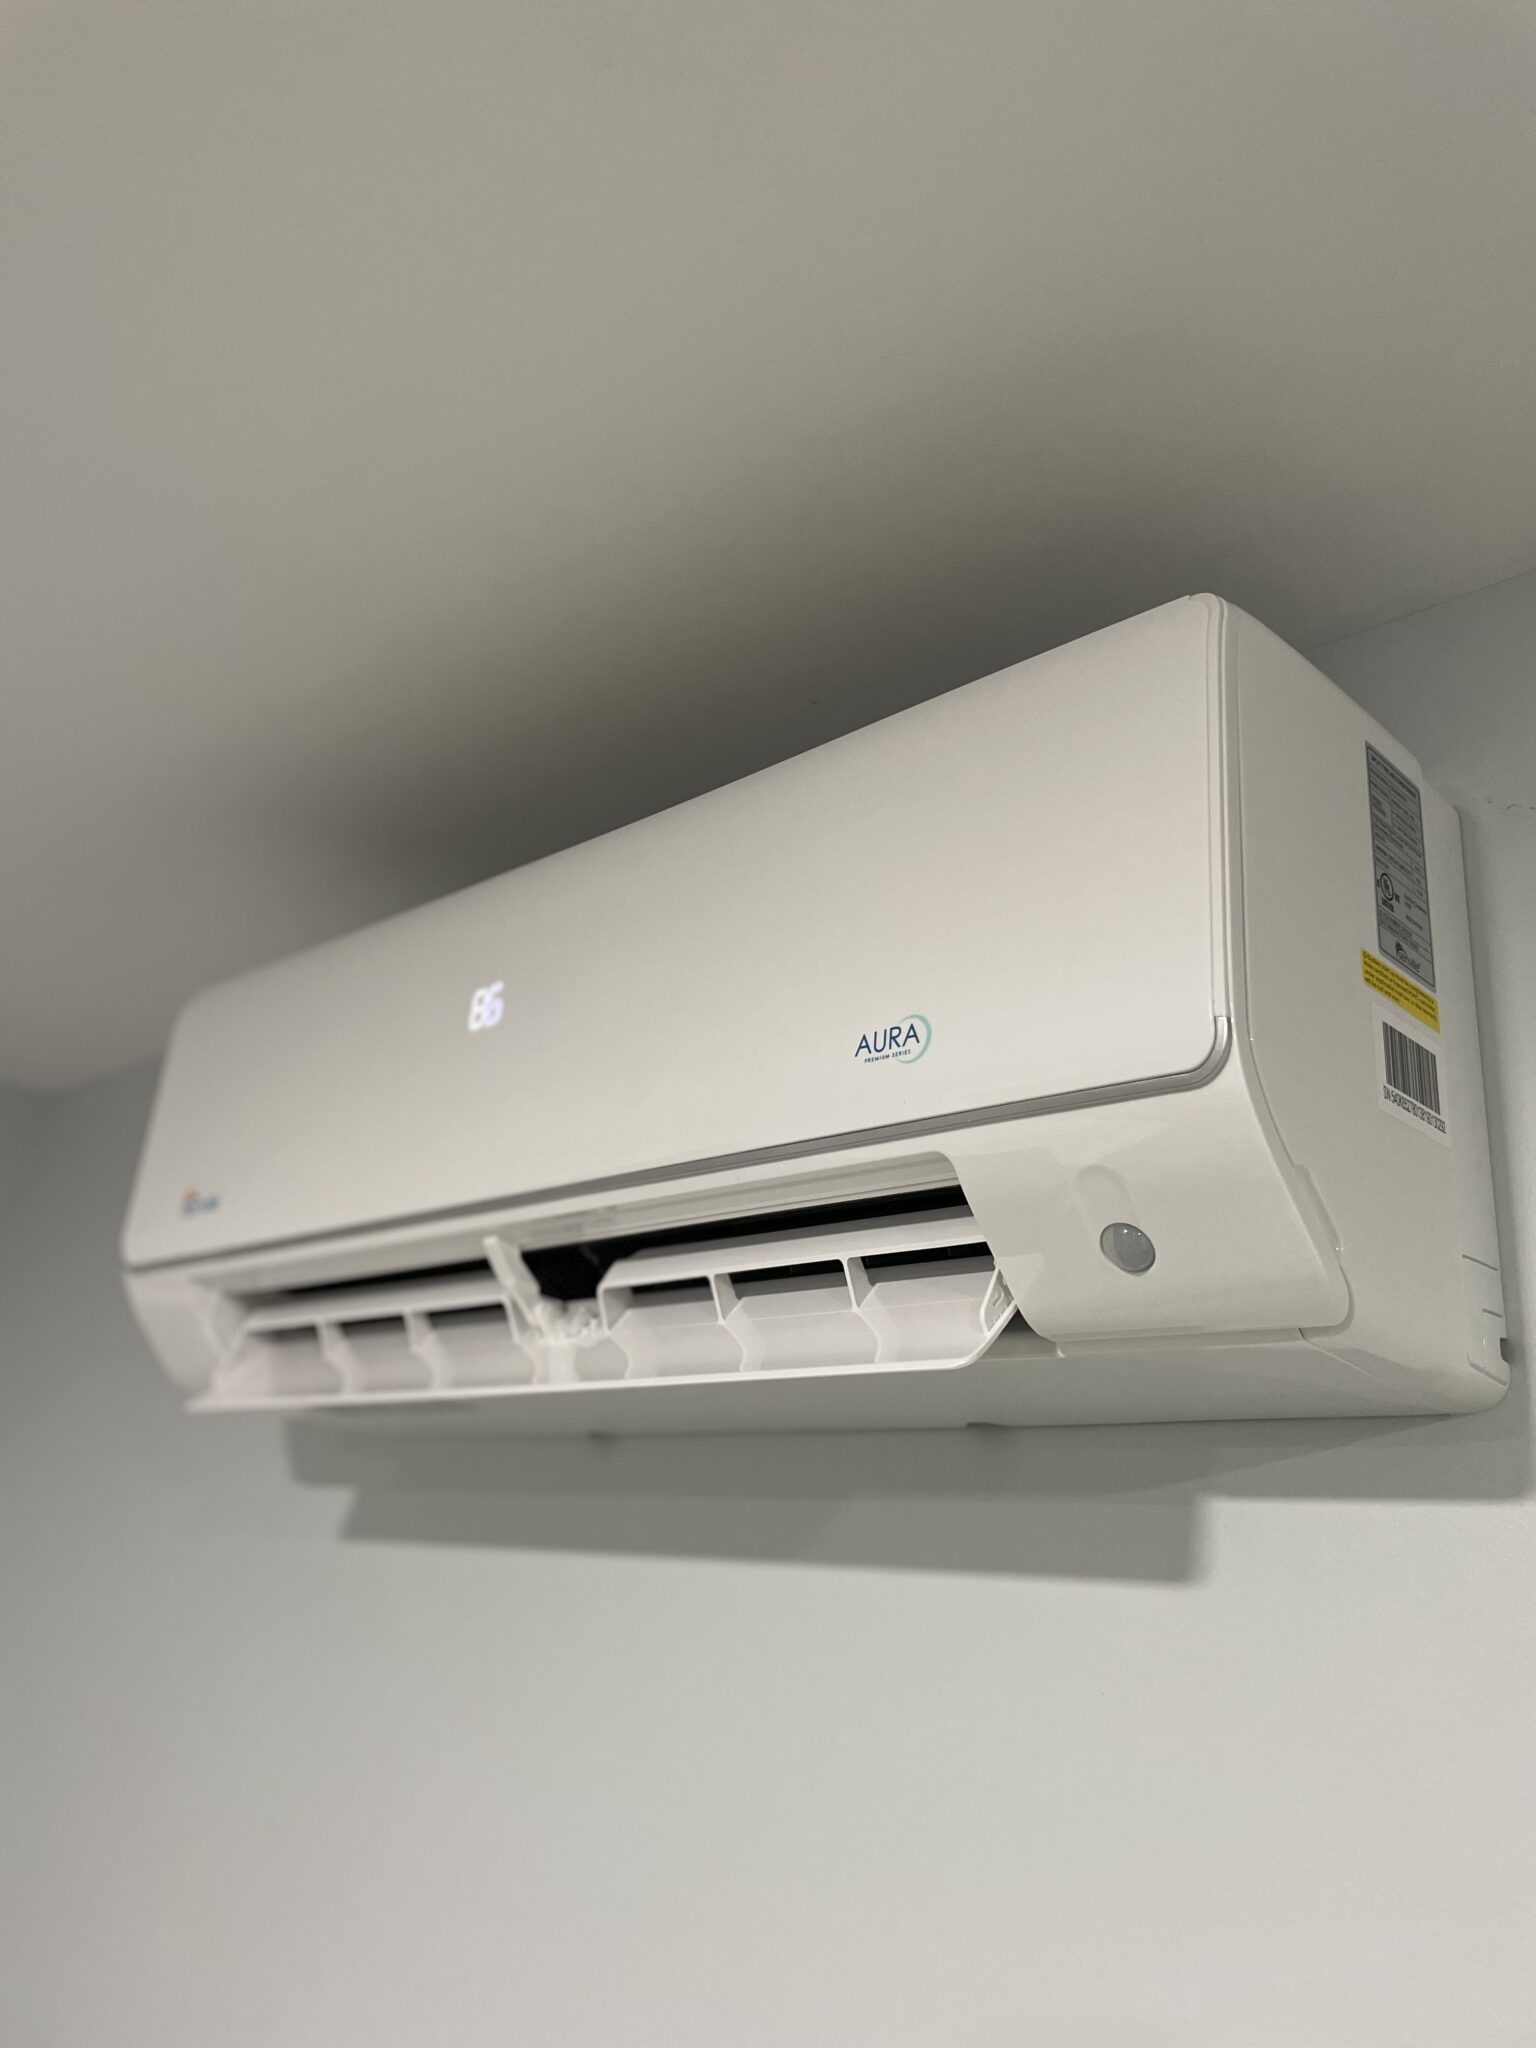 New Mini split air conditioning system, heating syste, ductless heating, ductless heat pump Senville. Troy, NY